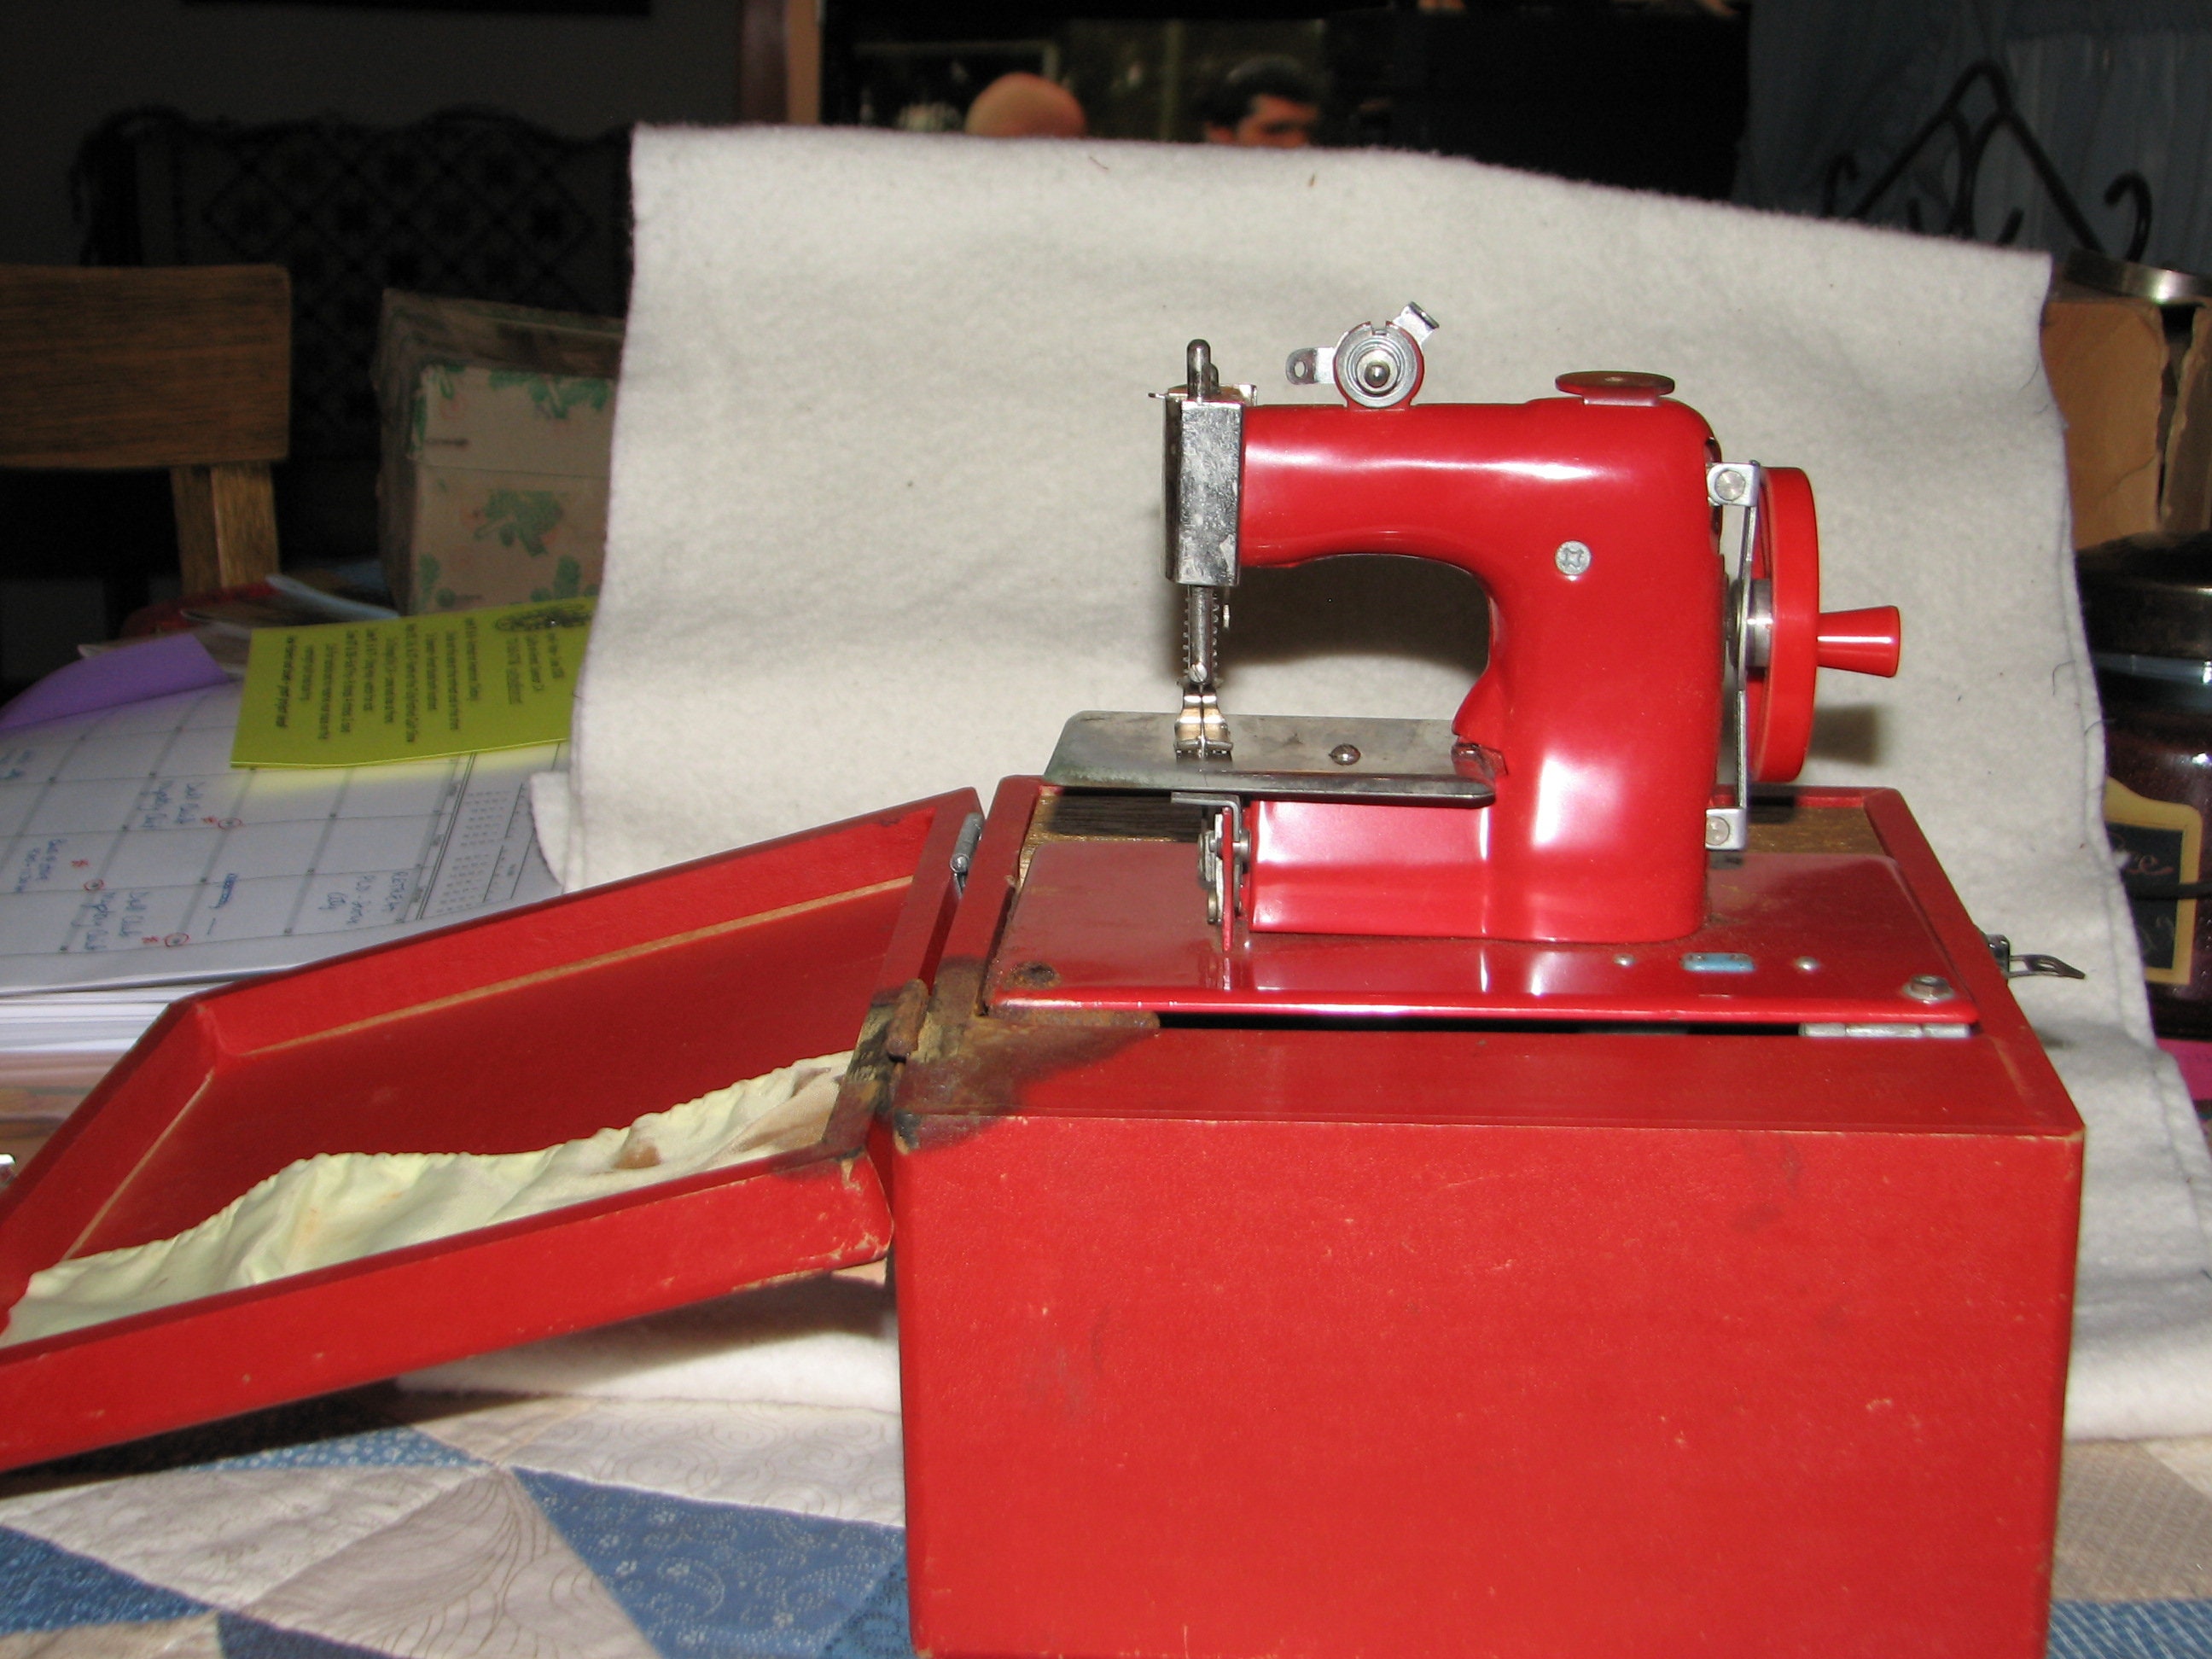 Vintage 1950s Mid Century Pink Sewing Machine/ IDLE HOUR/ Sewing